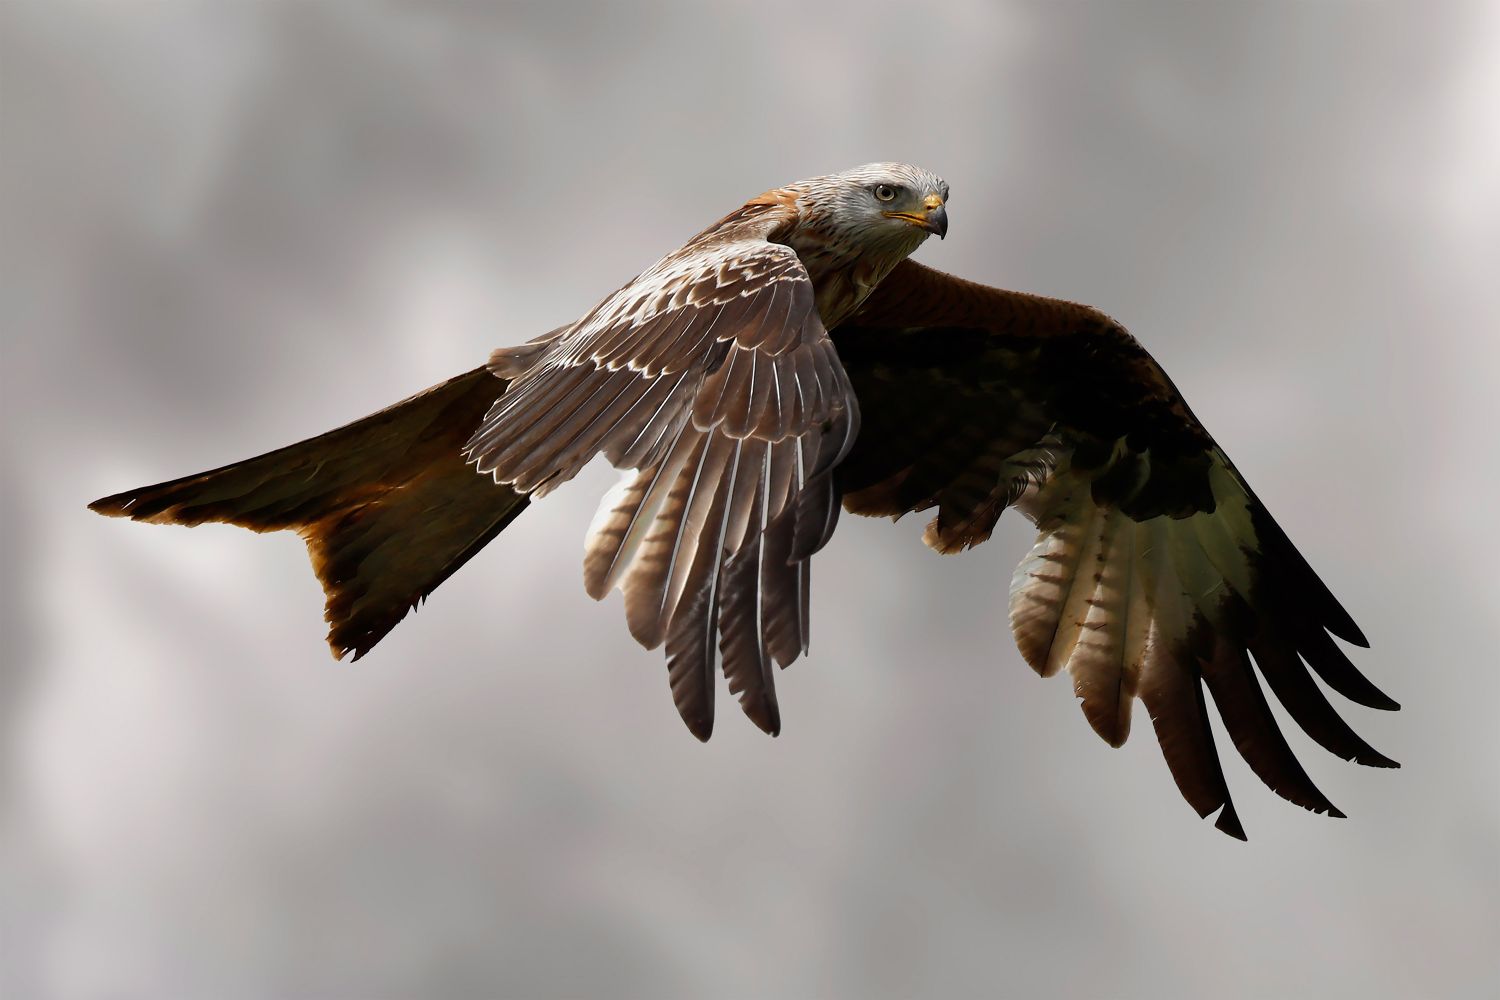 Red Kite Acrobatics in the skies above Dumfries.